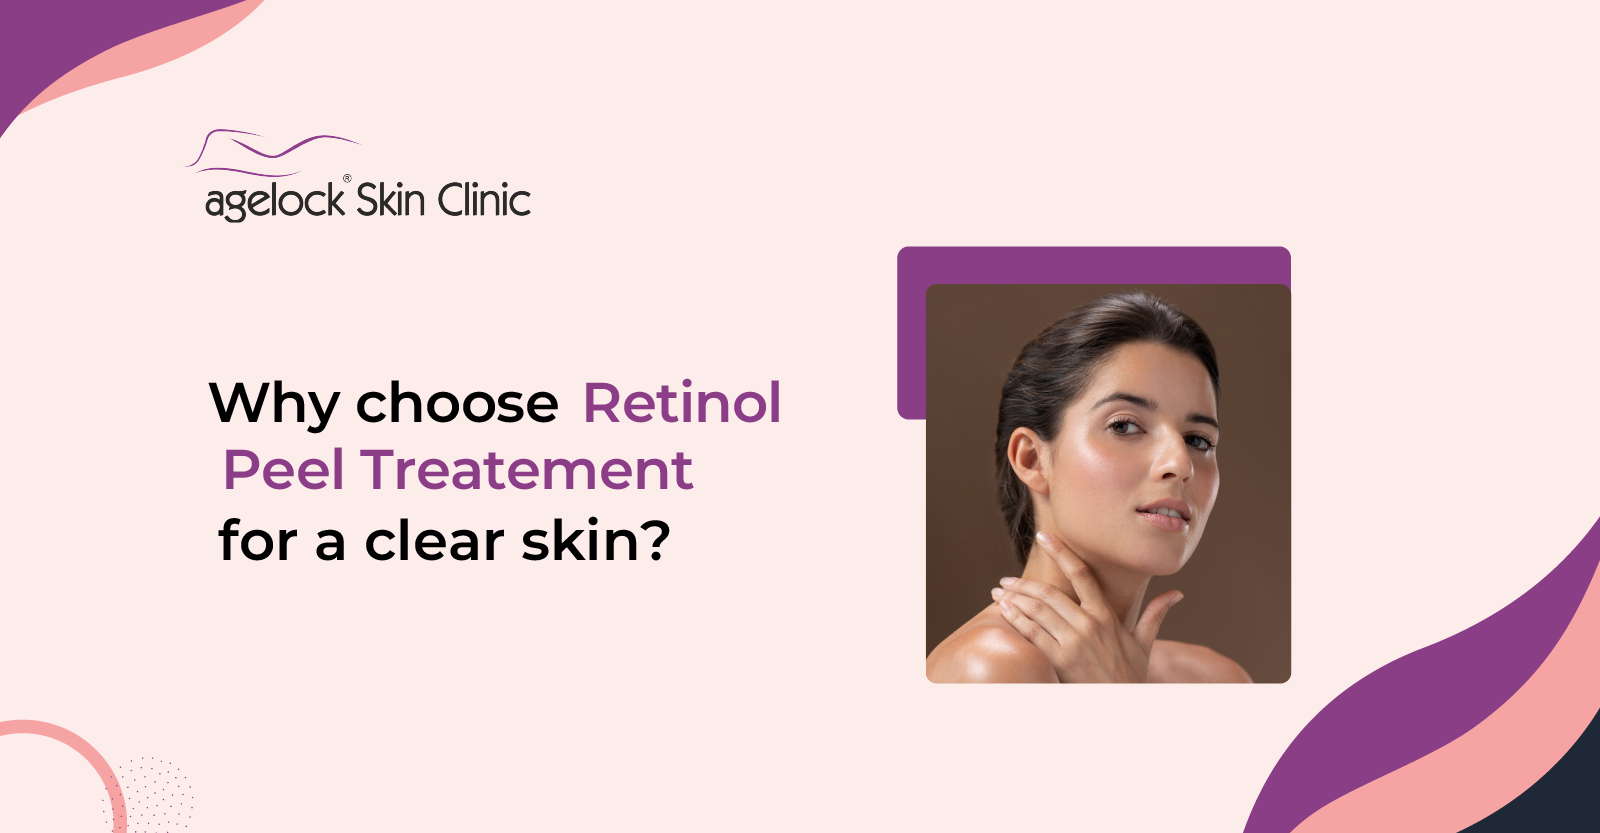 <strong>Why choose Retinol Peel Treatment for a clear skin?</strong>